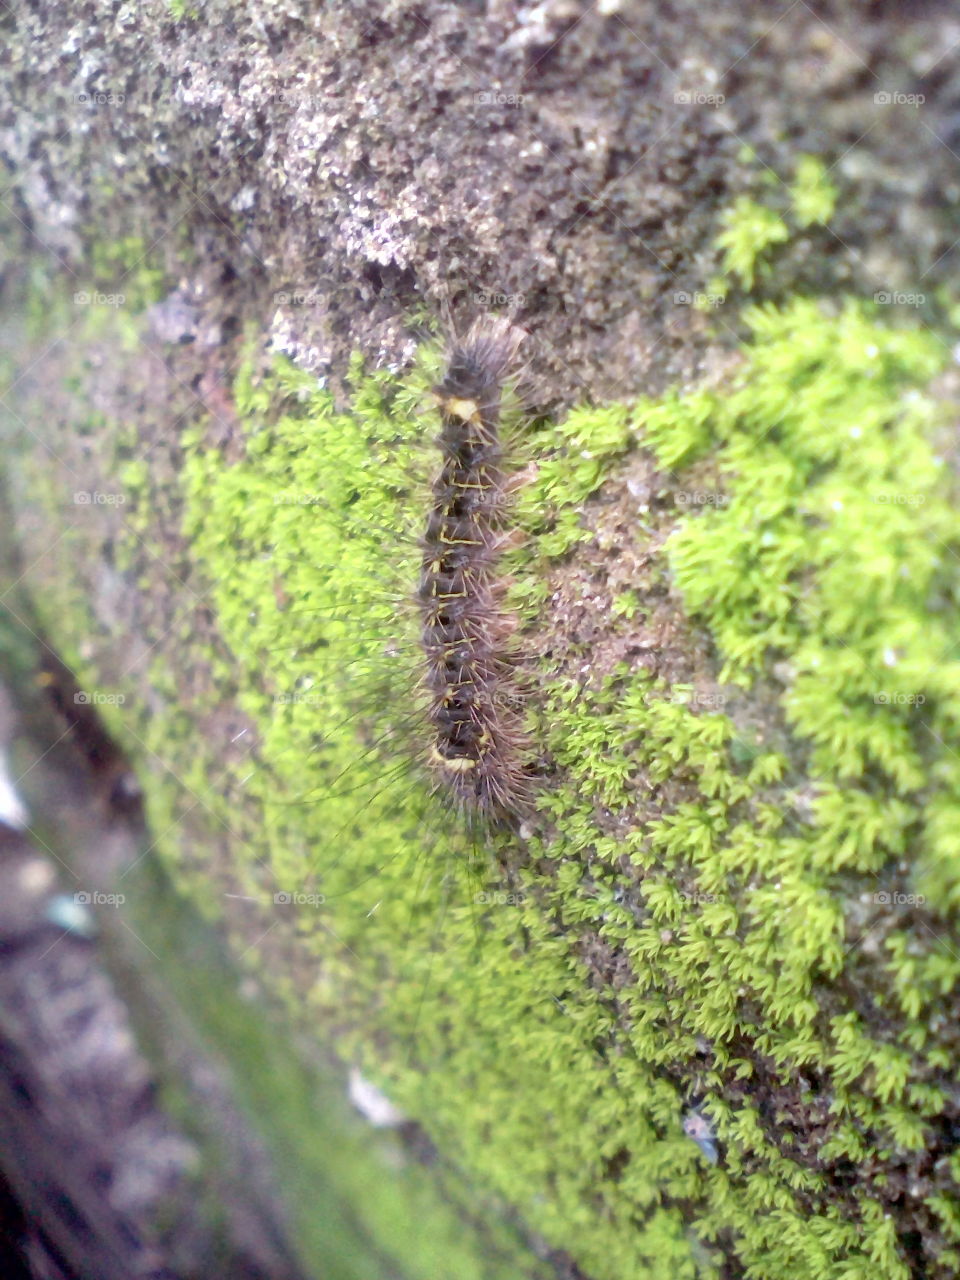 caterpillar is eating moss leaf !!!!!!!!